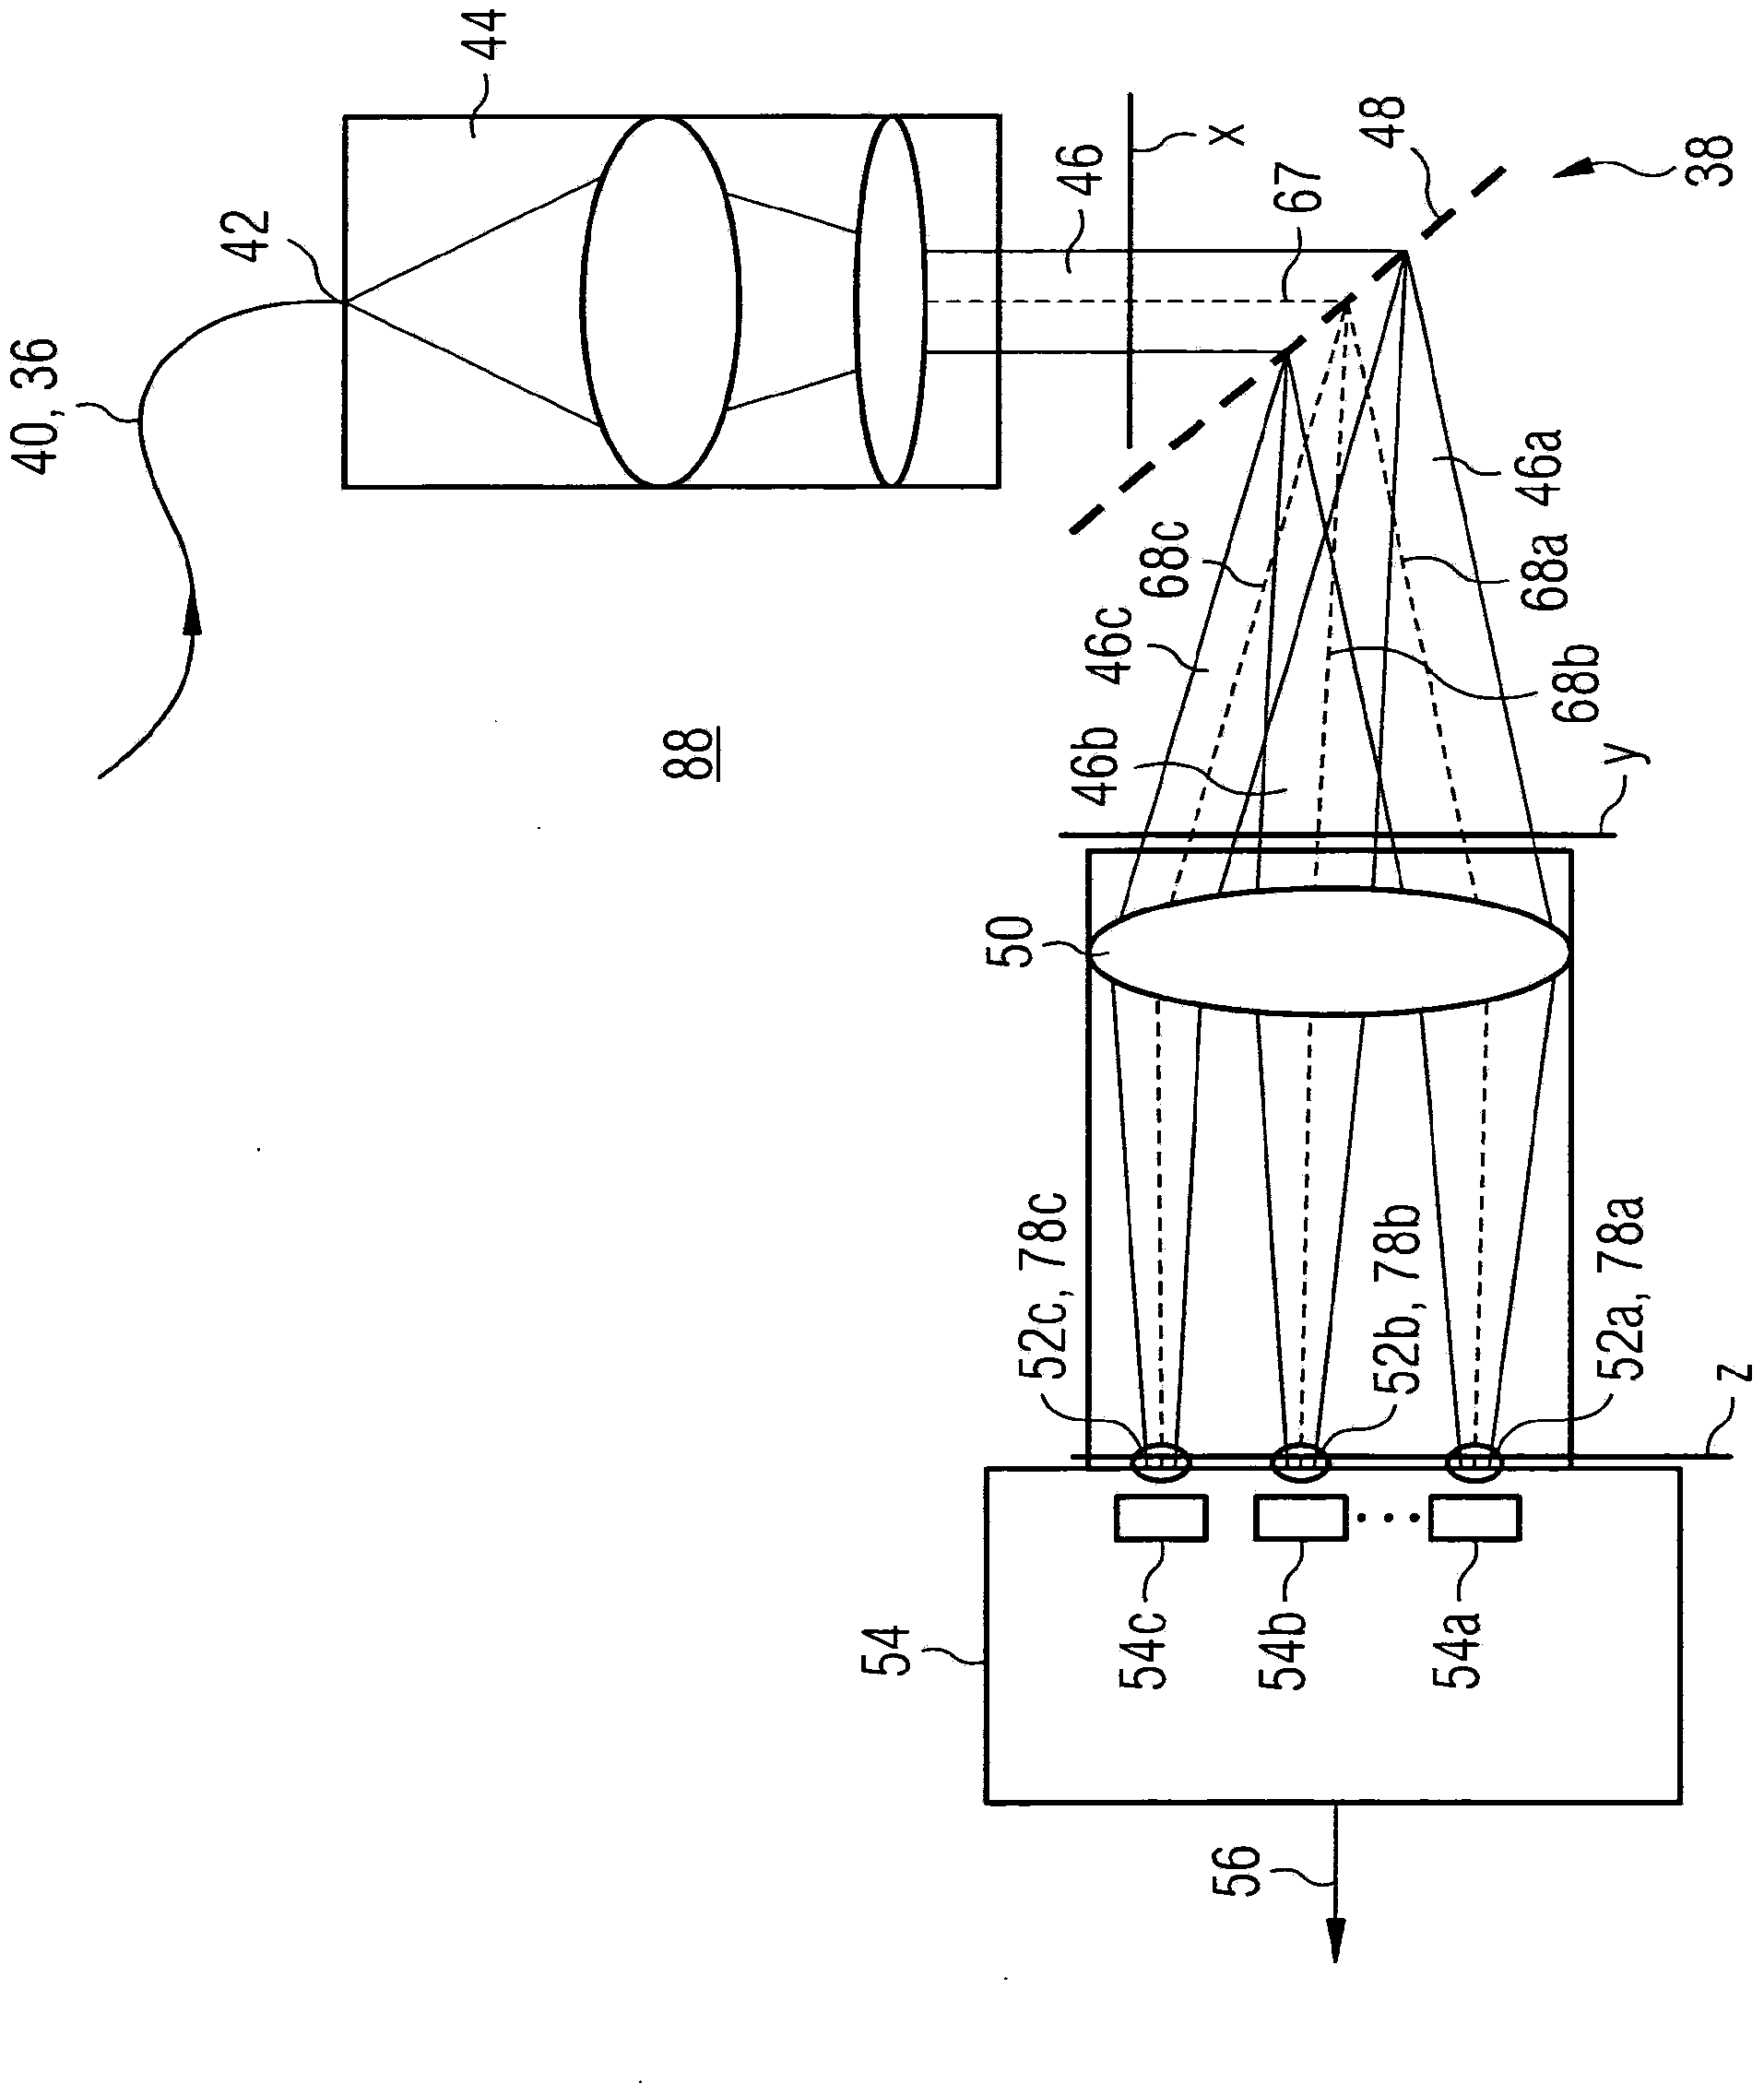 Spectroscopic instrument and process for spectral analysis